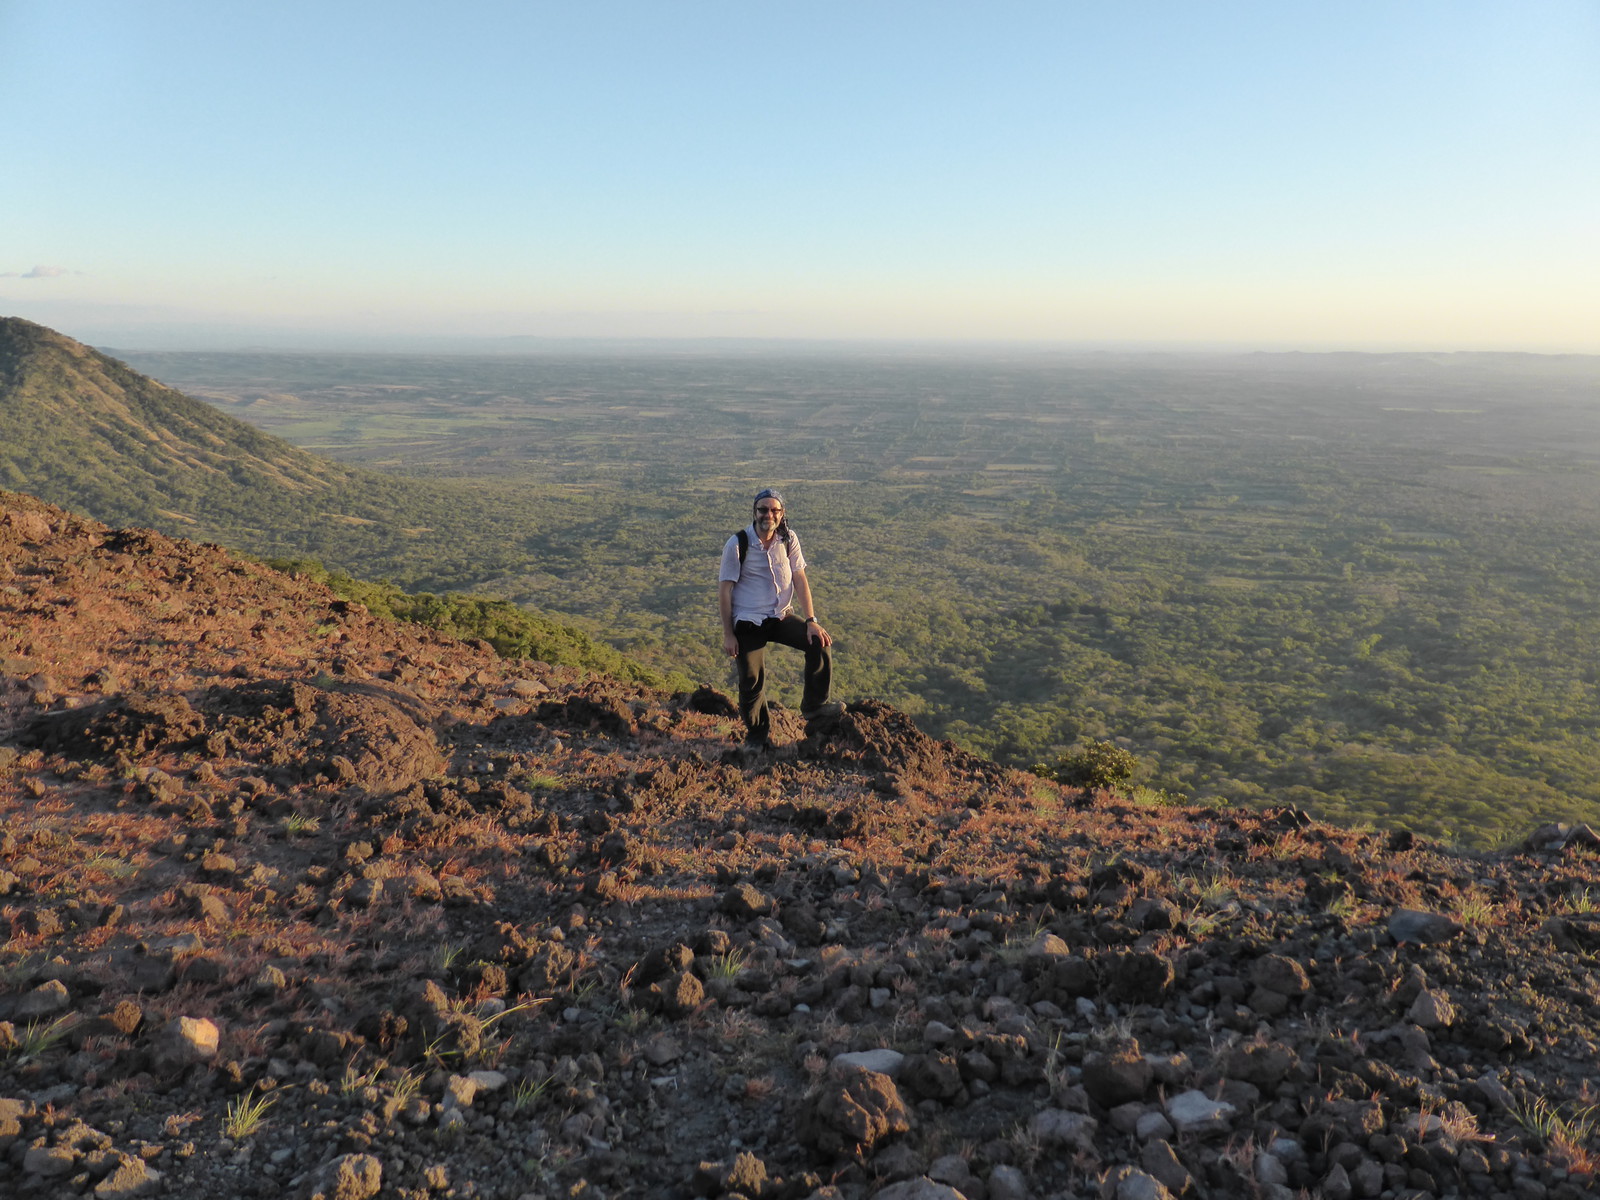 Mark overlooking the southern plains of Nicaragua, towards the Pacific